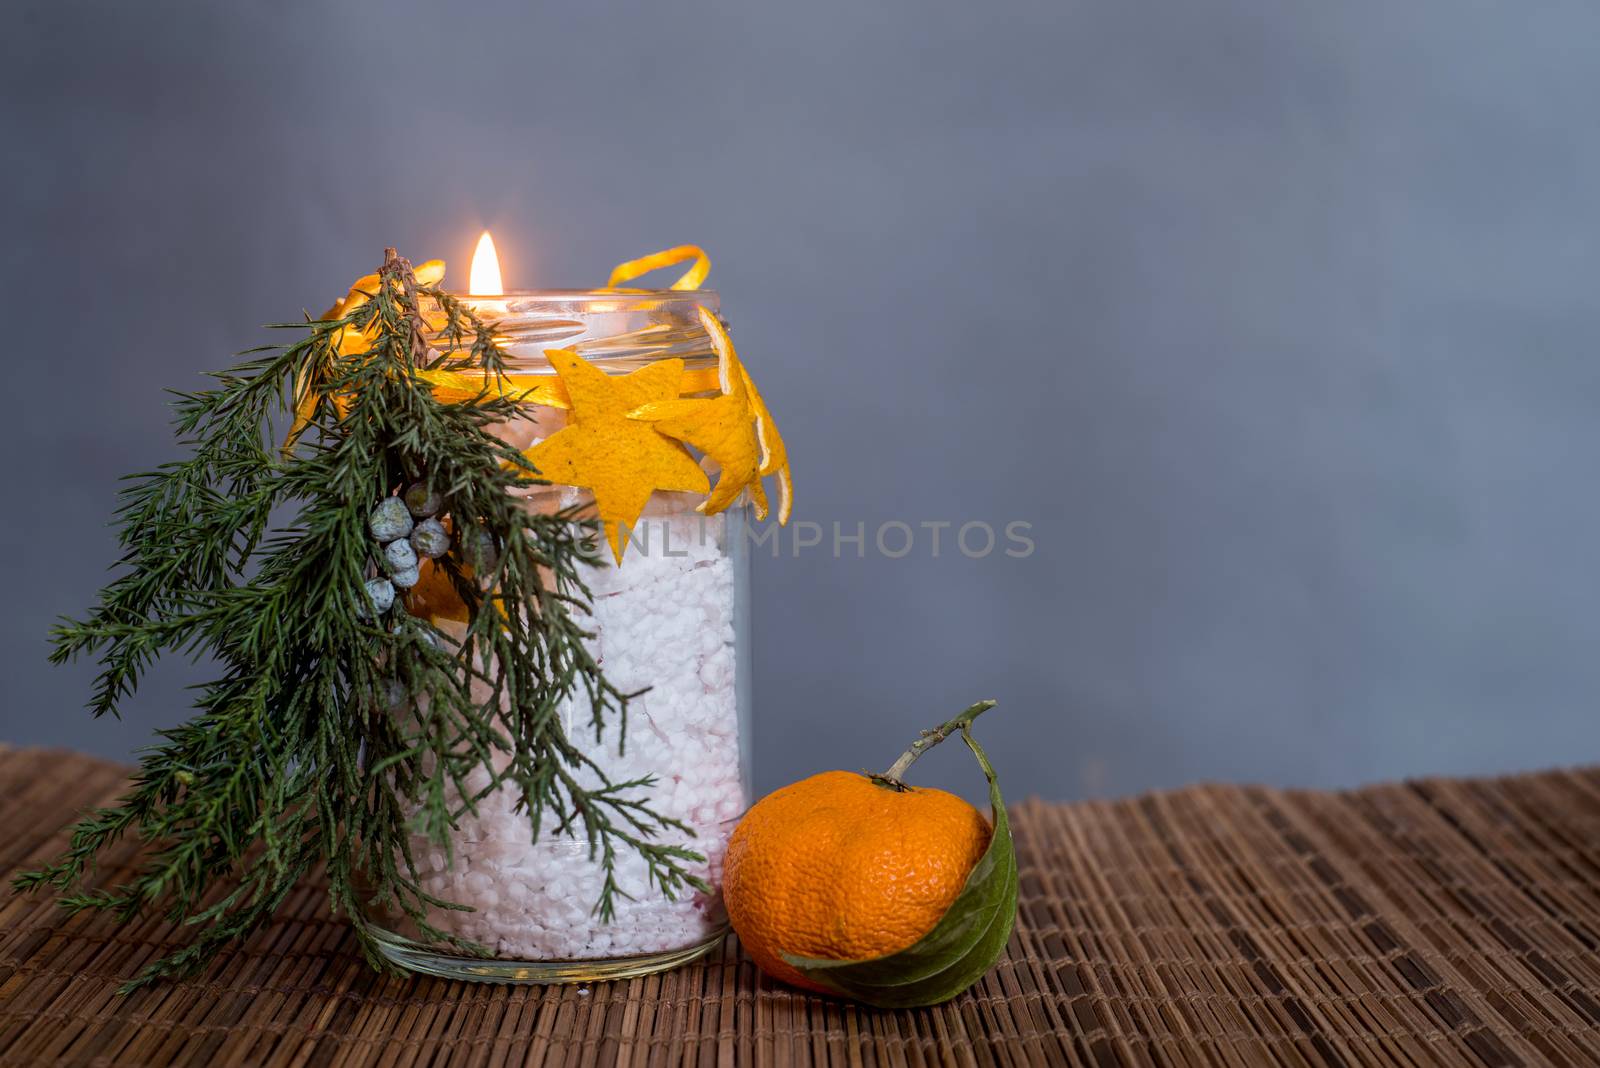 Christmas decorations on the table, hand made lit candle in a glass bottle with orange peel stars on the wooden tablecloth with a tangerine on grey